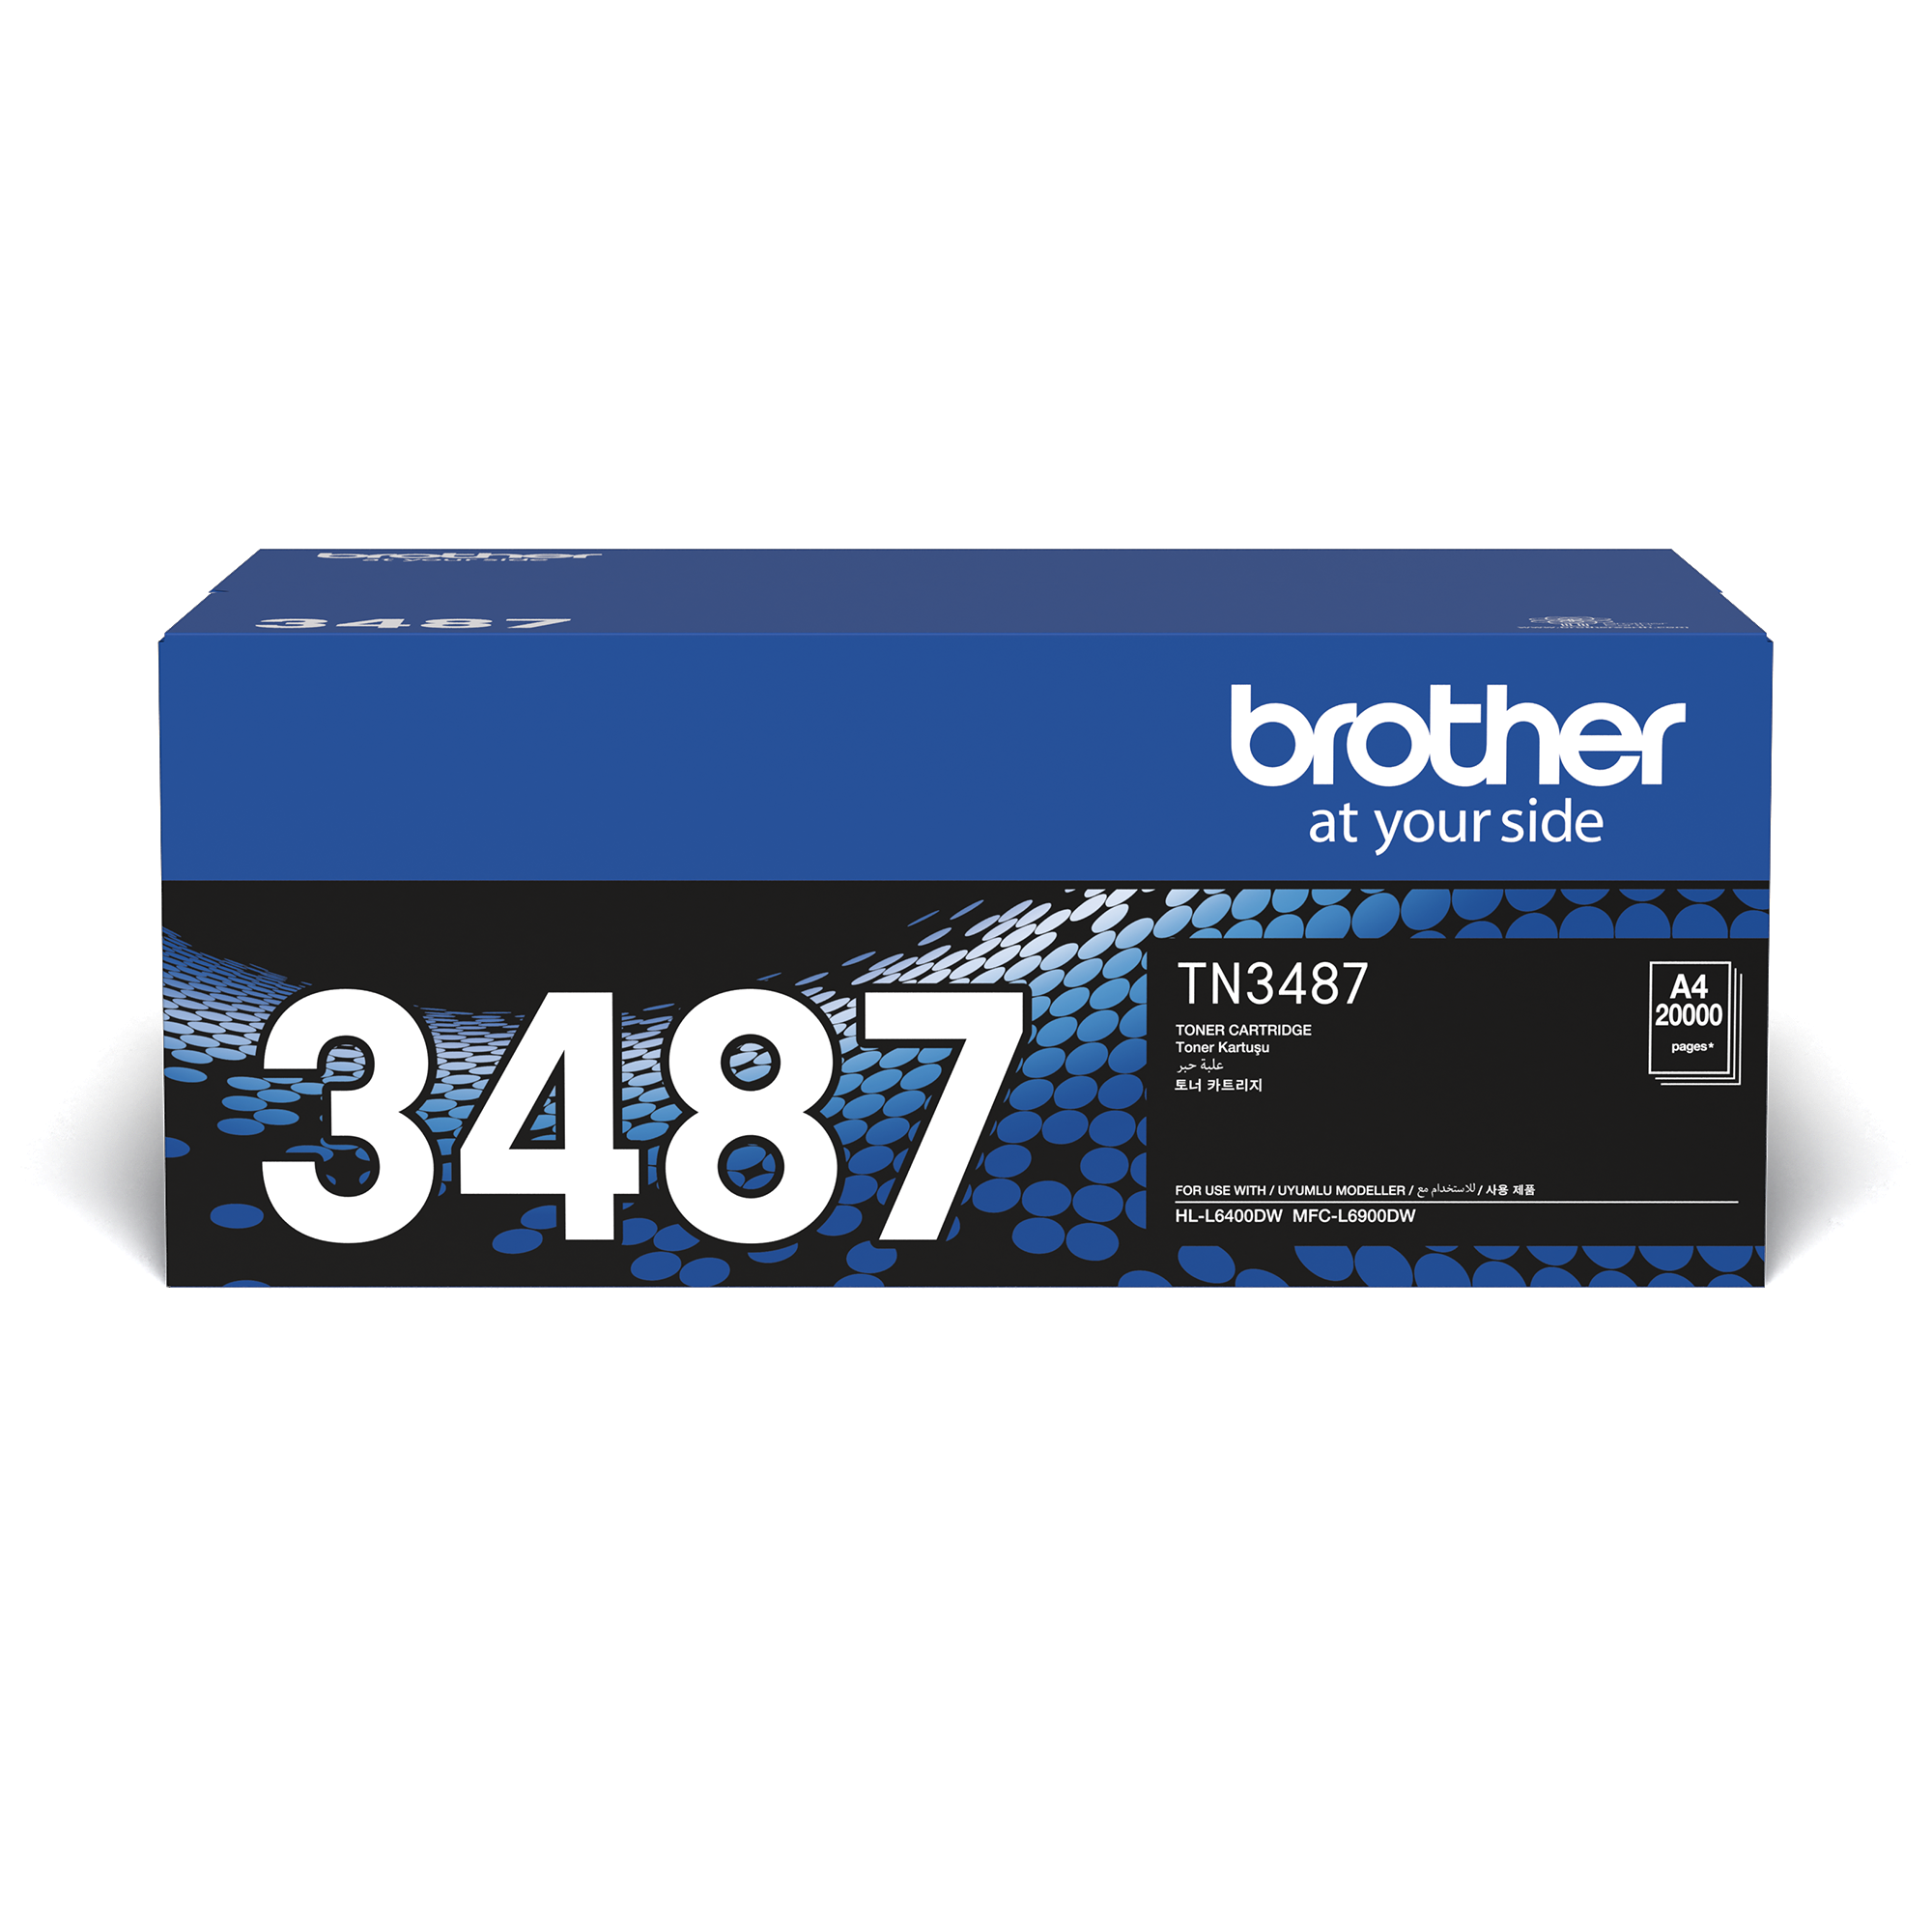 Brother TN3487 TN-3487 Black Toner Cartridge (20,000 Pages)